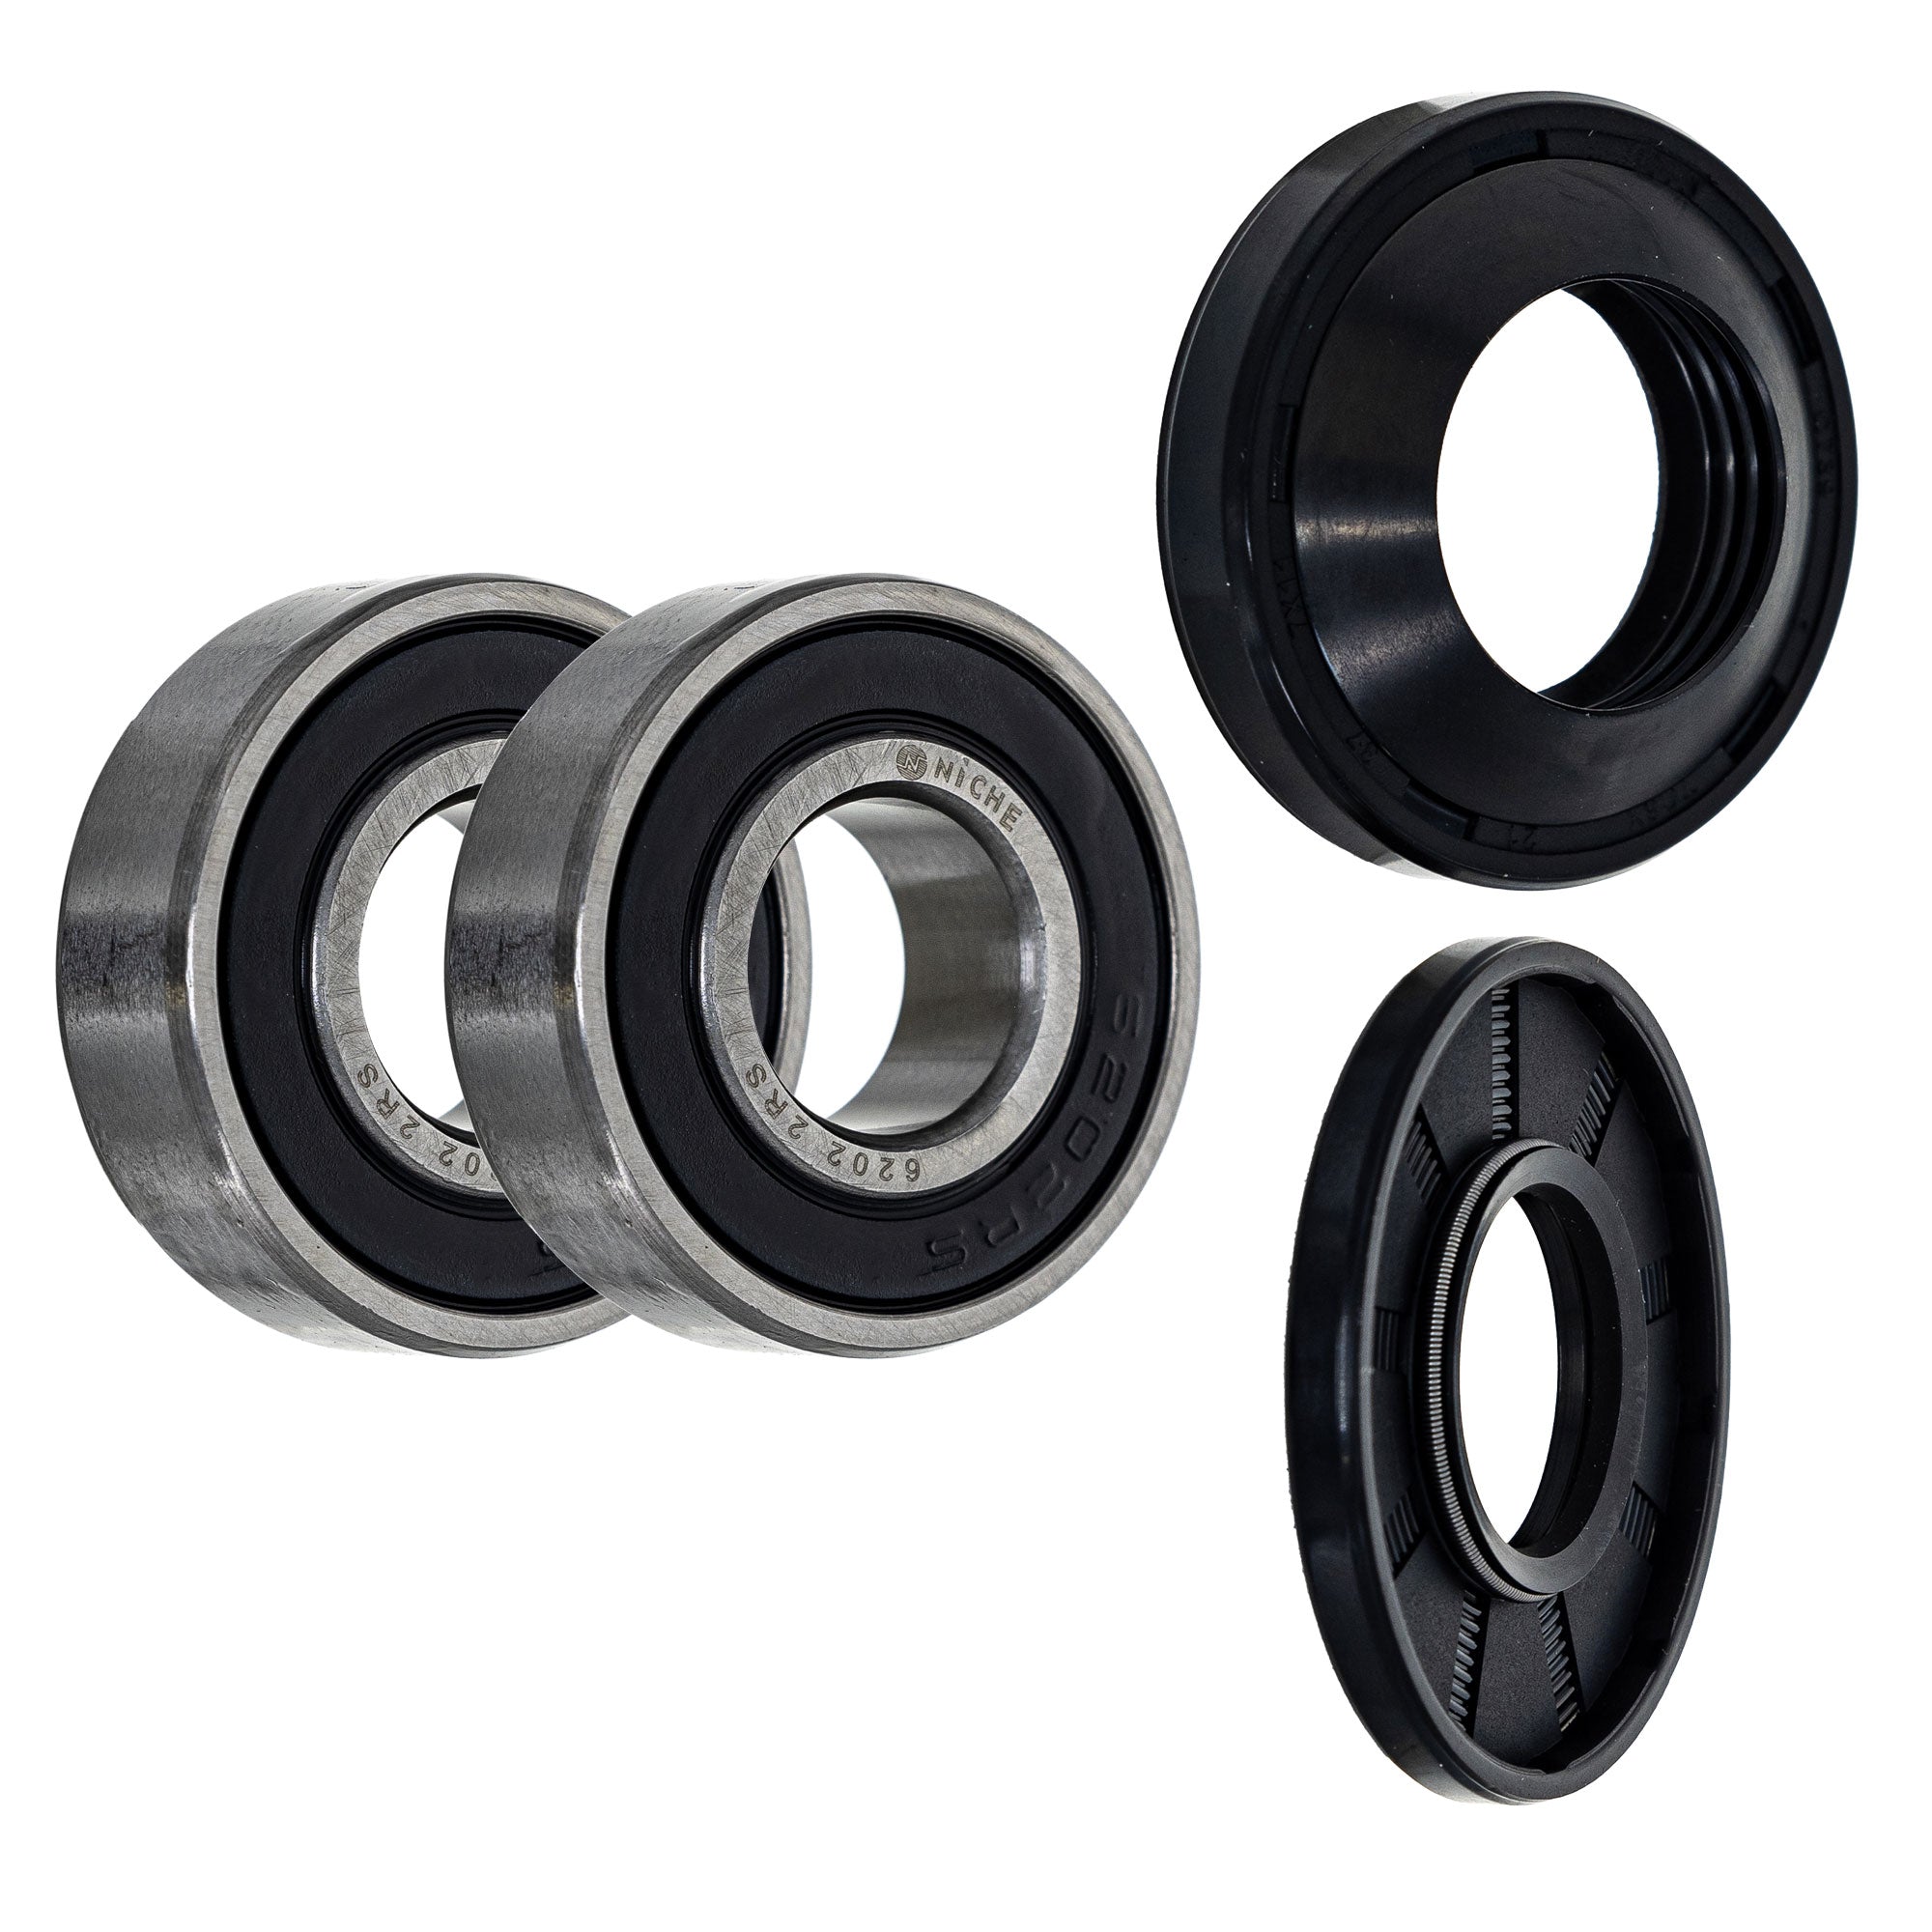 Wheel Bearing Seal Kit for zOTHER Ref No CRF250F CRF230F CRF150F NICHE MK1008964